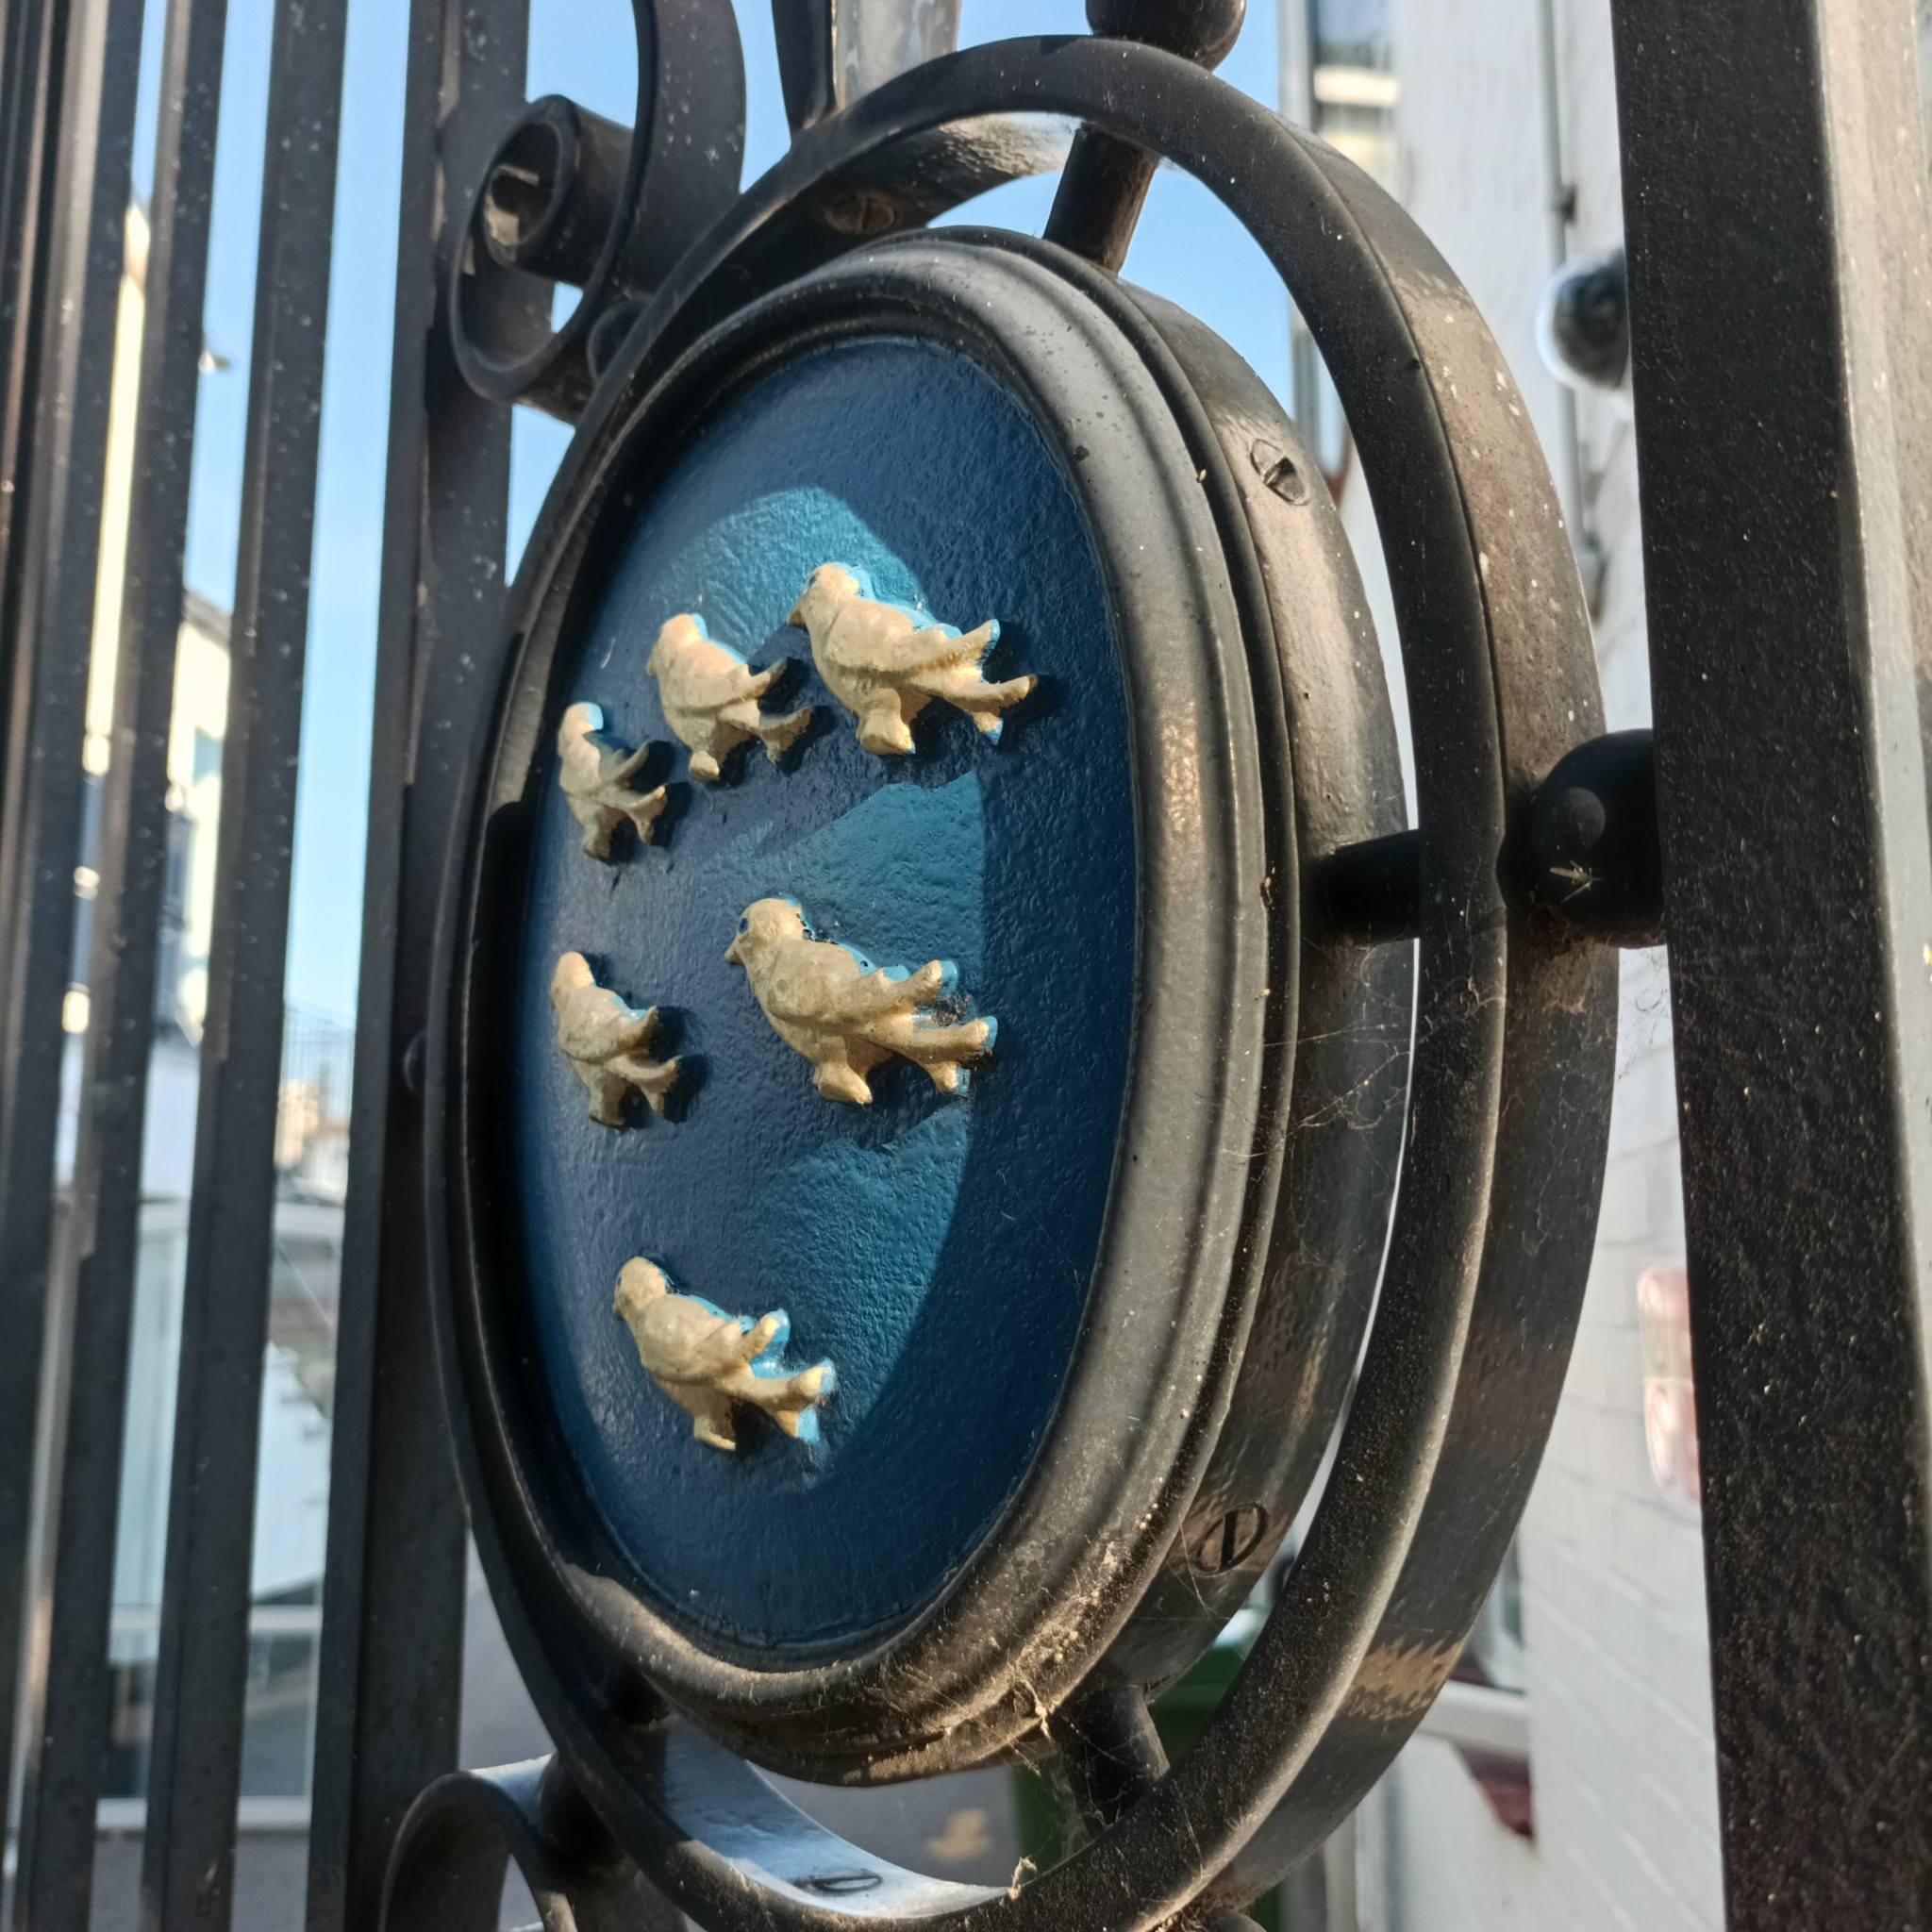 The gates at Hove Cricket Ground display the crest of Sussex County Cricket Club which became a powerhouse of limited overs cricket in the early days ©ITG